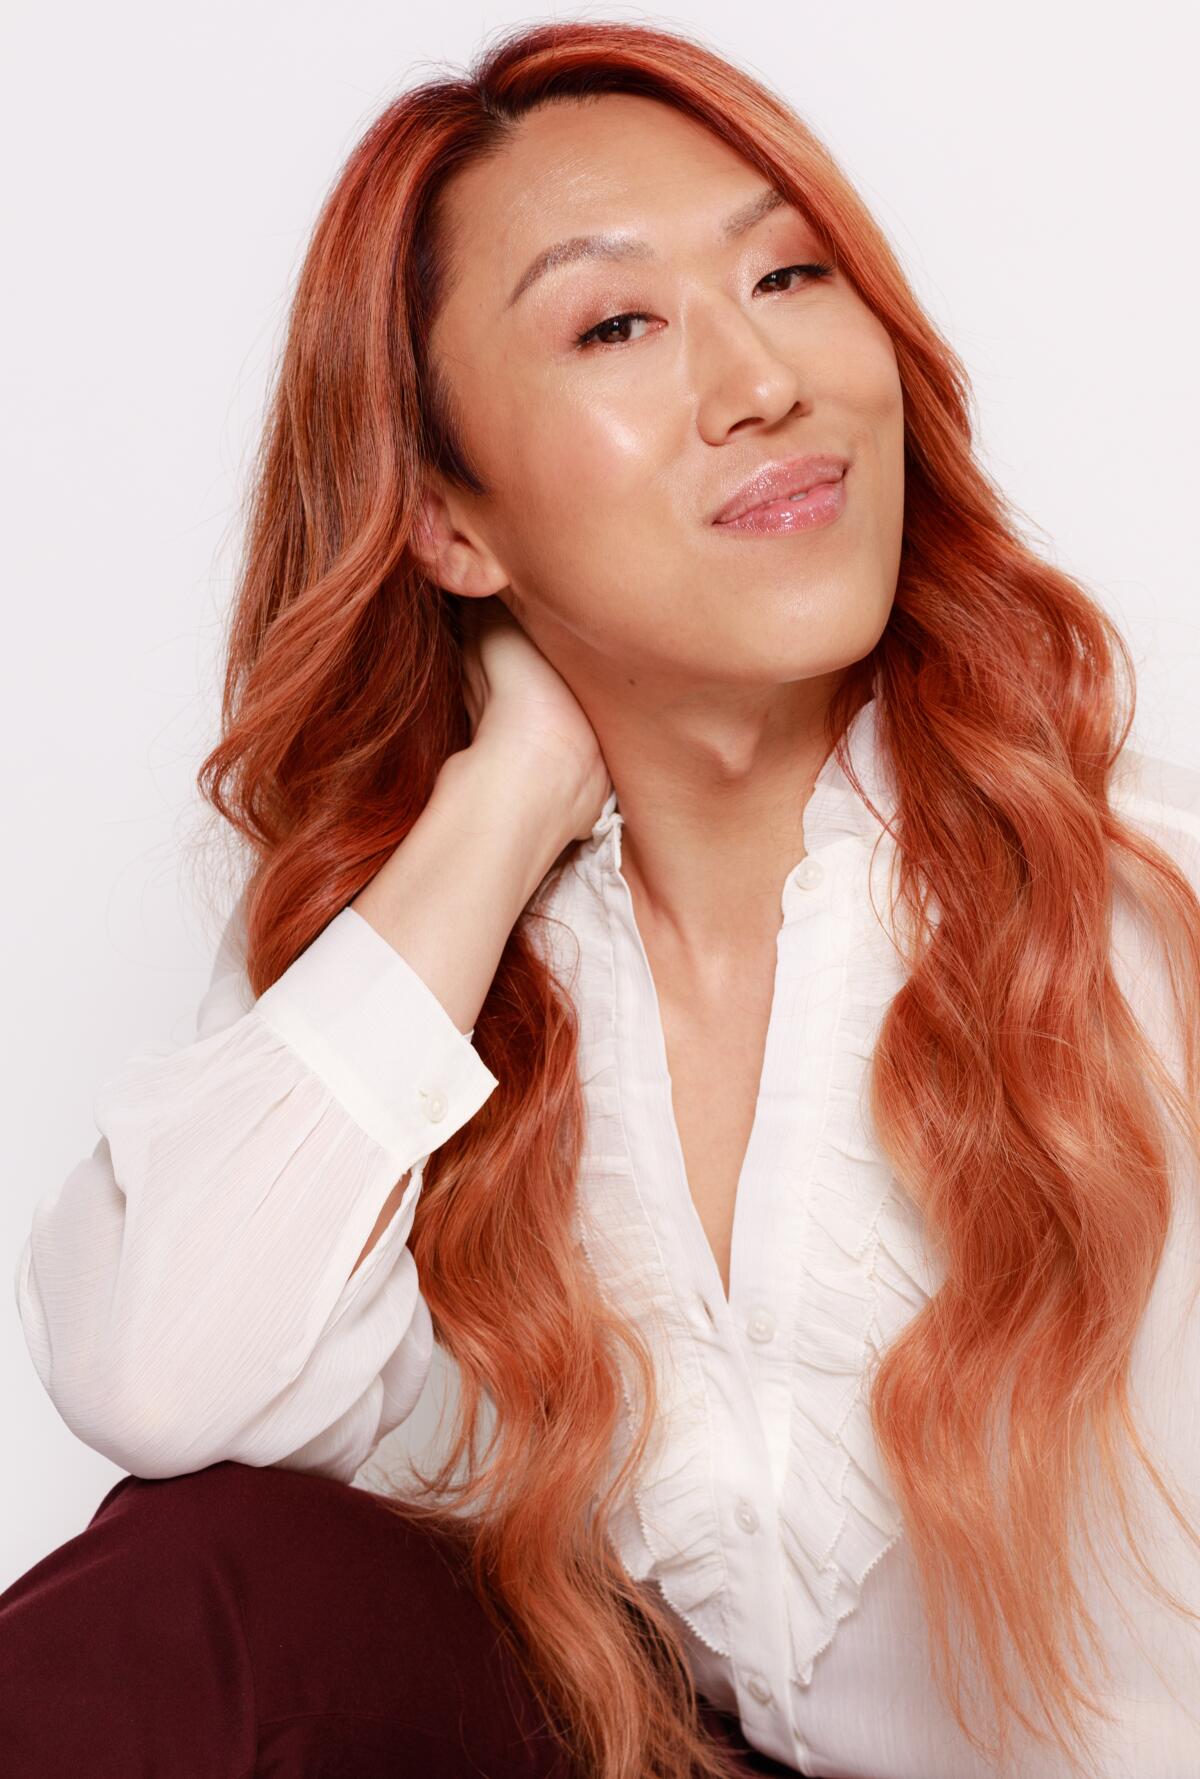 A headshot of a woman with long red hair in a white button-down shirt.